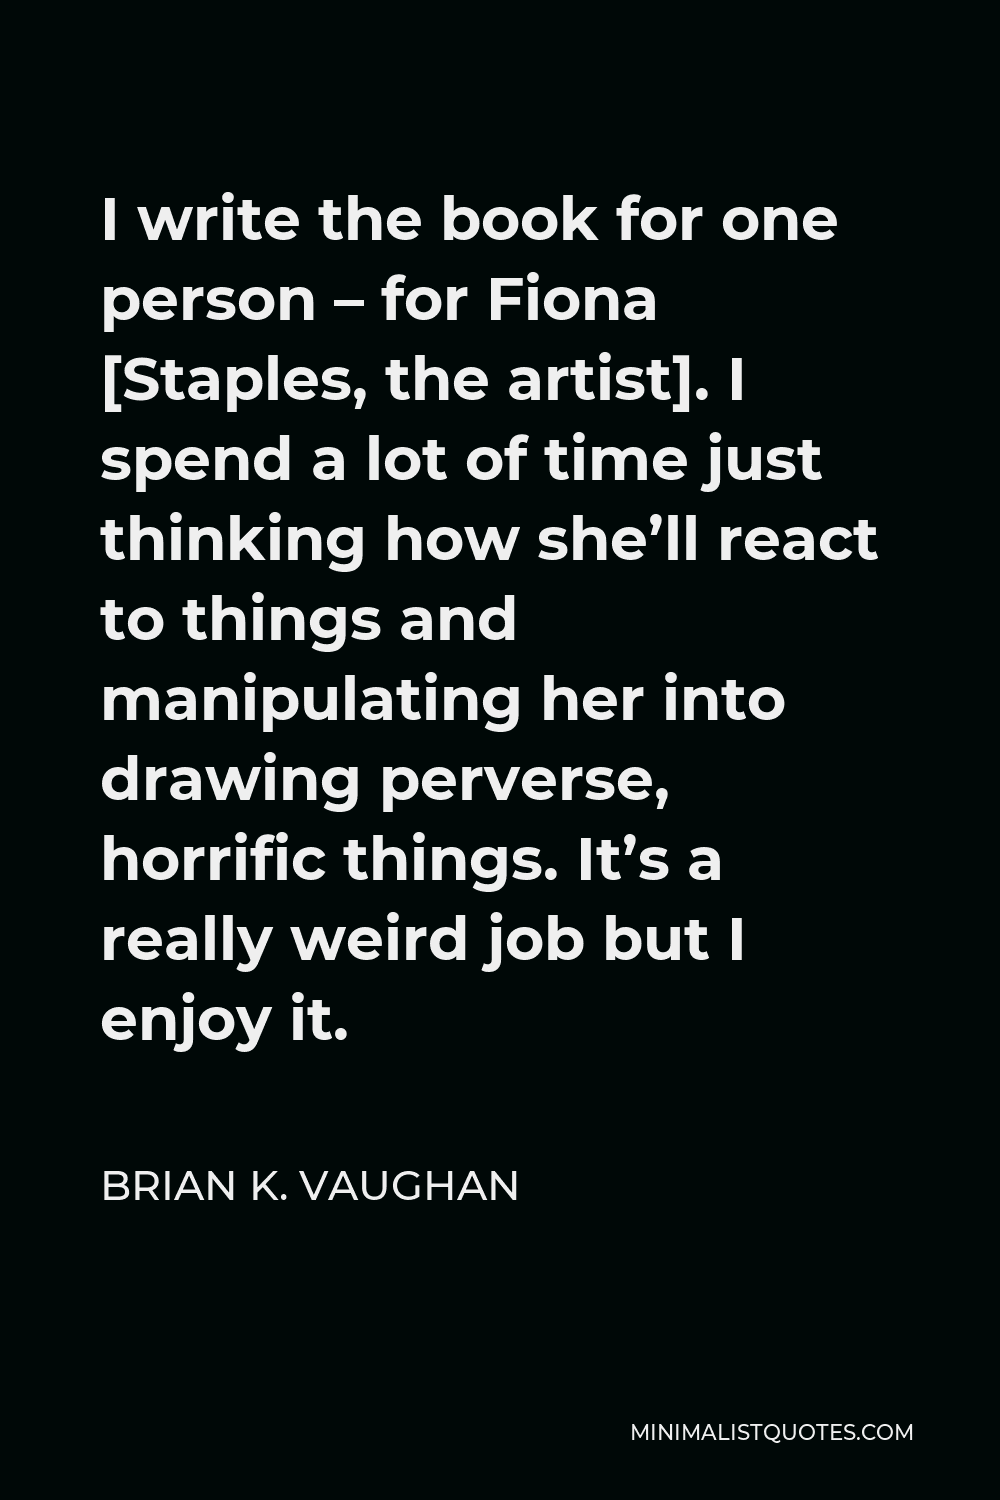 Brian K. Vaughan Quote - I write the book for one person – for Fiona [Staples, the artist]. I spend a lot of time just thinking how she’ll react to things and manipulating her into drawing perverse, horrific things. It’s a really weird job but I enjoy it.